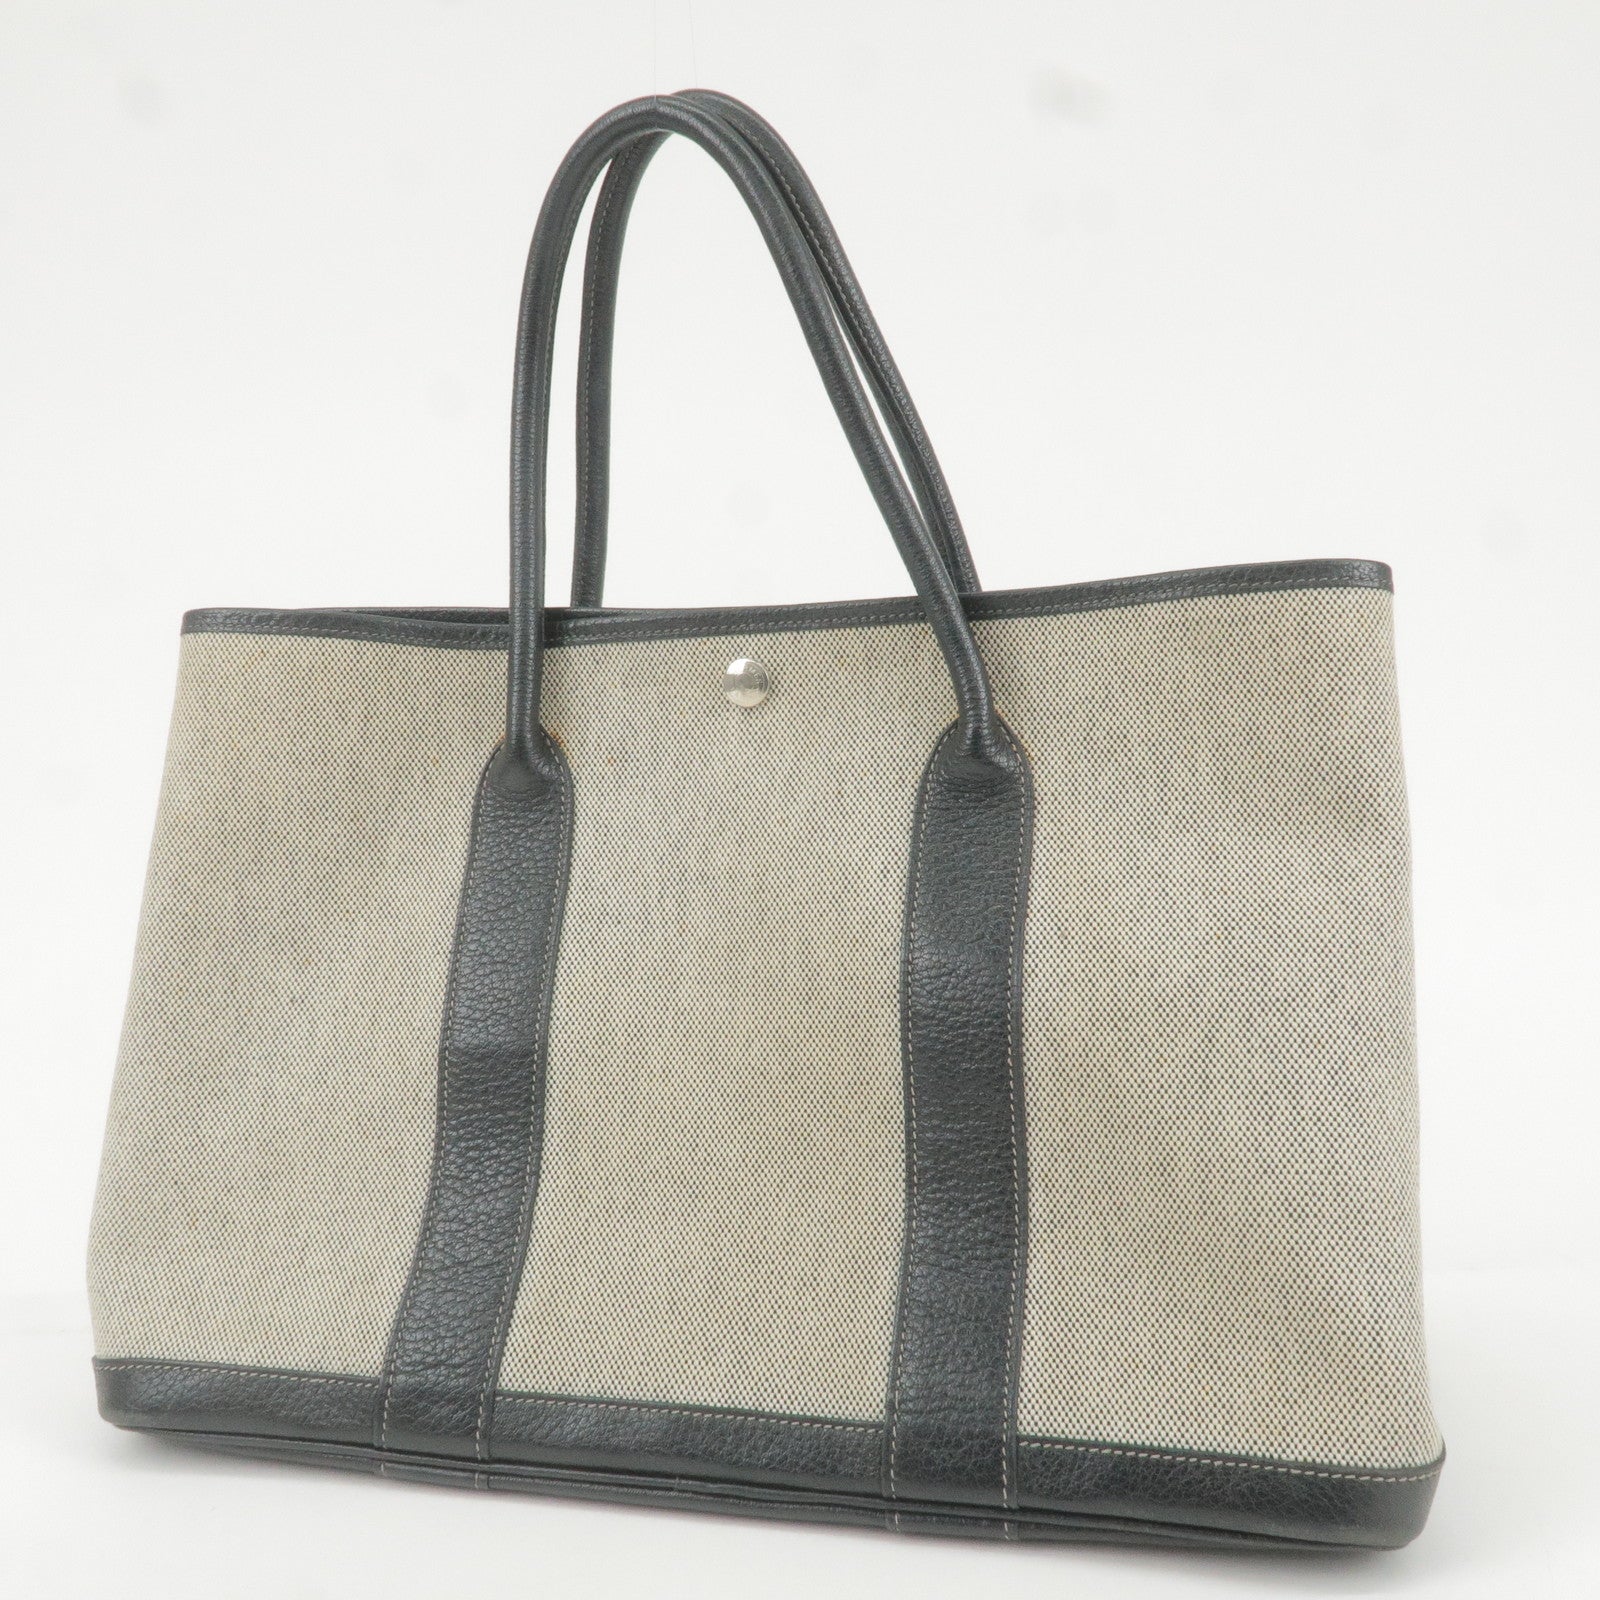 HERMES HERMES Garden Party PM Tote Bag Country leather Etoupe Grey SHW used